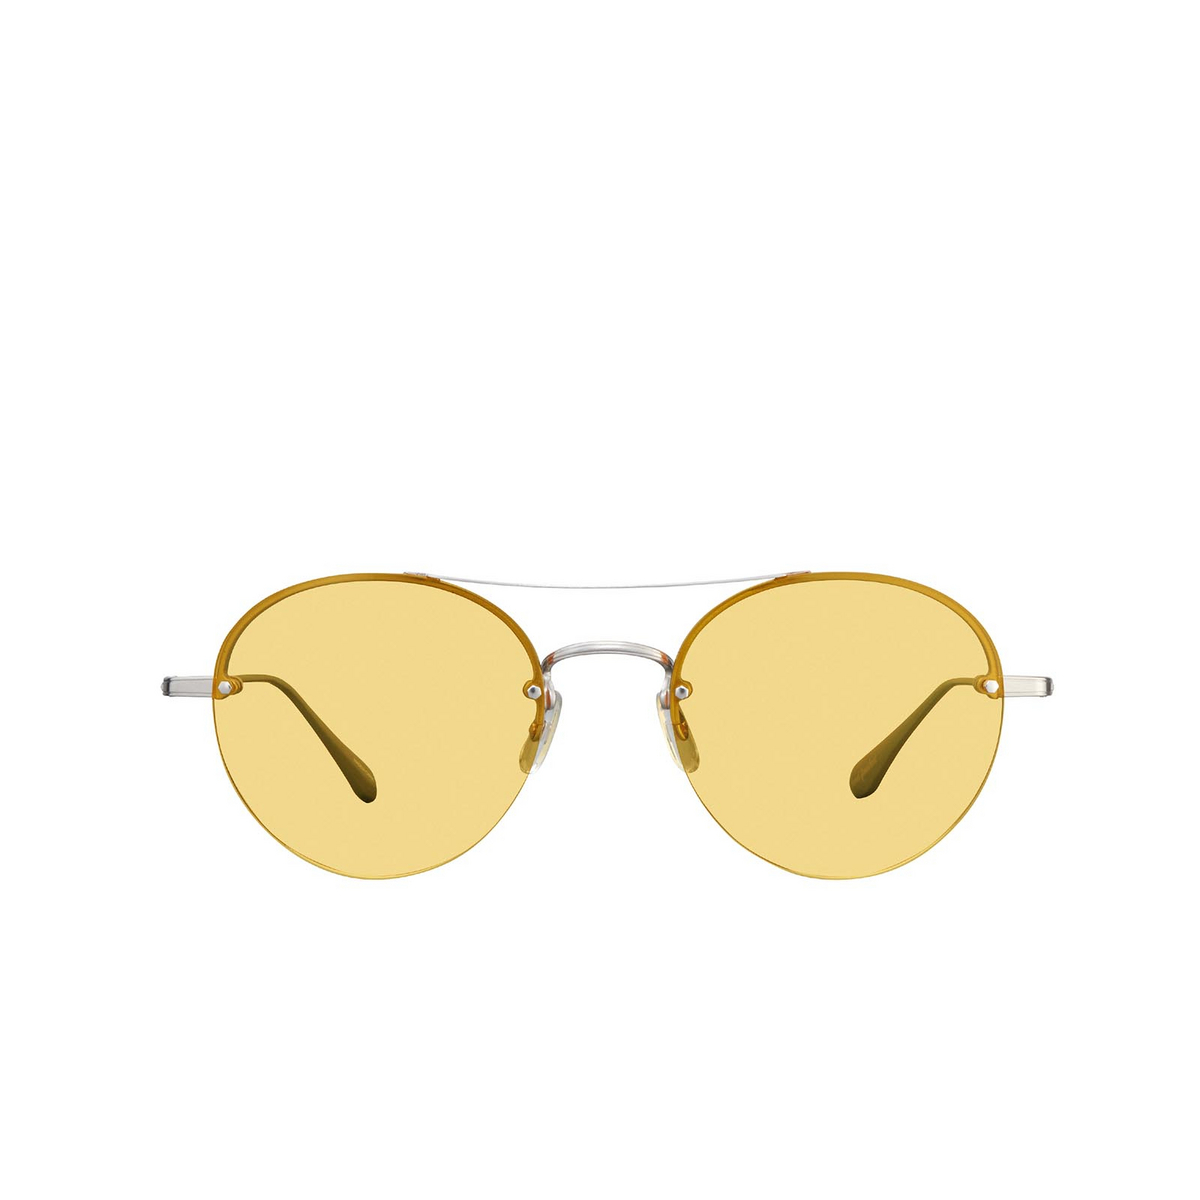 Garrett Leight BEAUMONT Sunglasses BS-CH/SY Silver-Champagne - front view